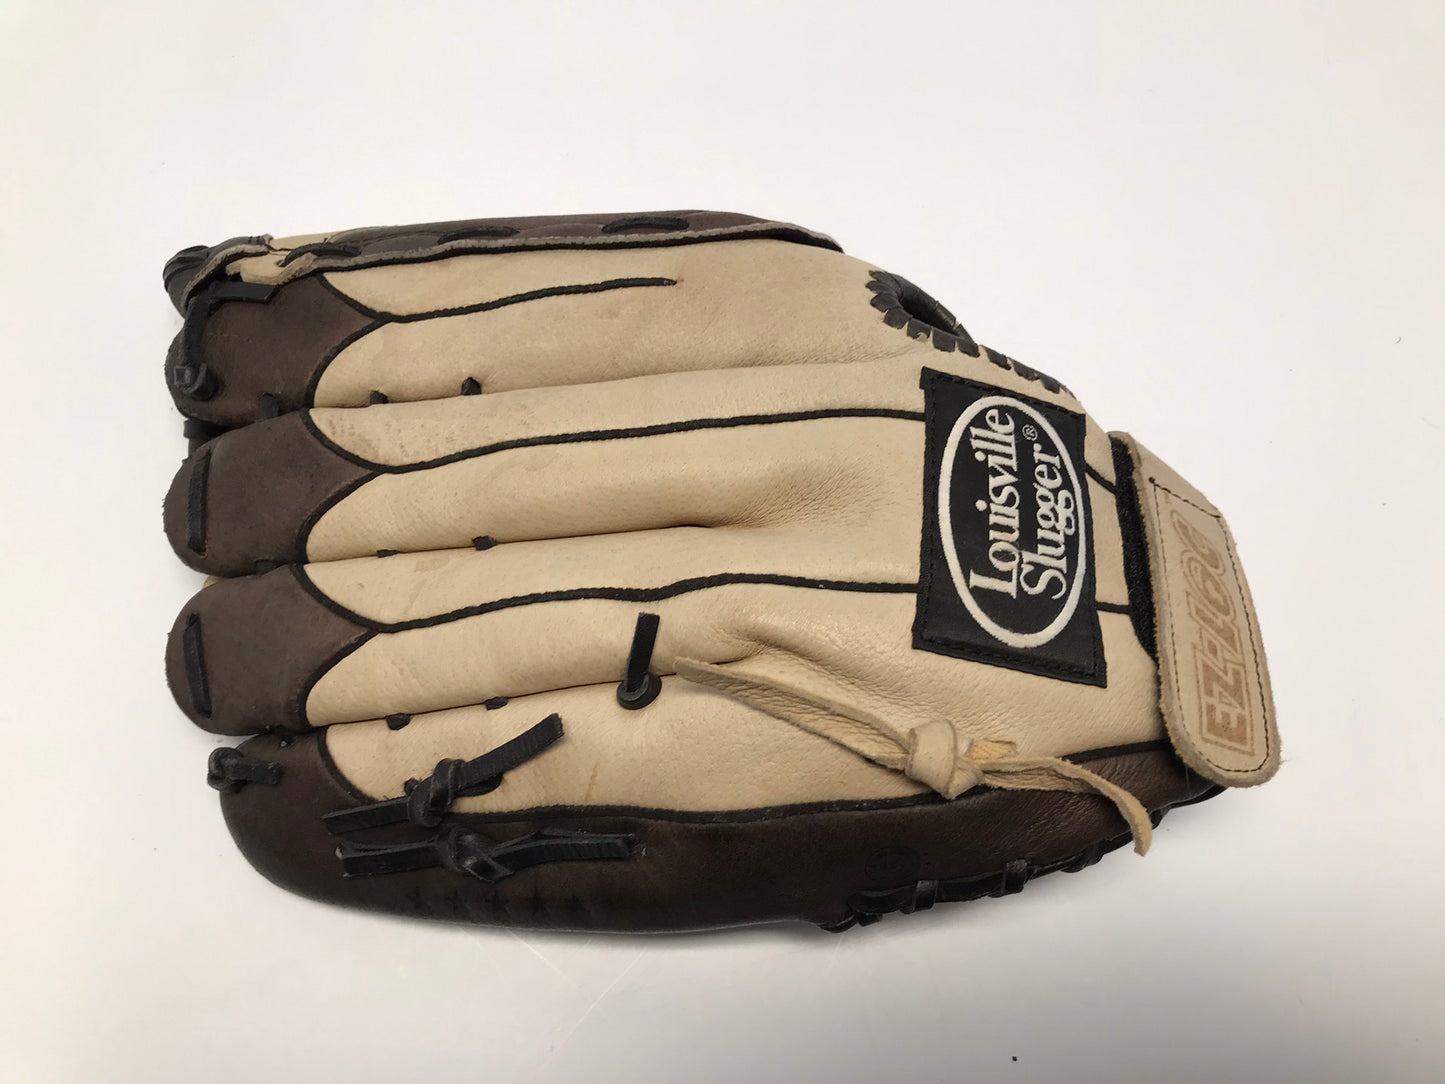 Baseball Glove Adult Size 13 inch  Lousiville Slugger  Tan Brown  Leather Fits on Left Hand NEW Demo